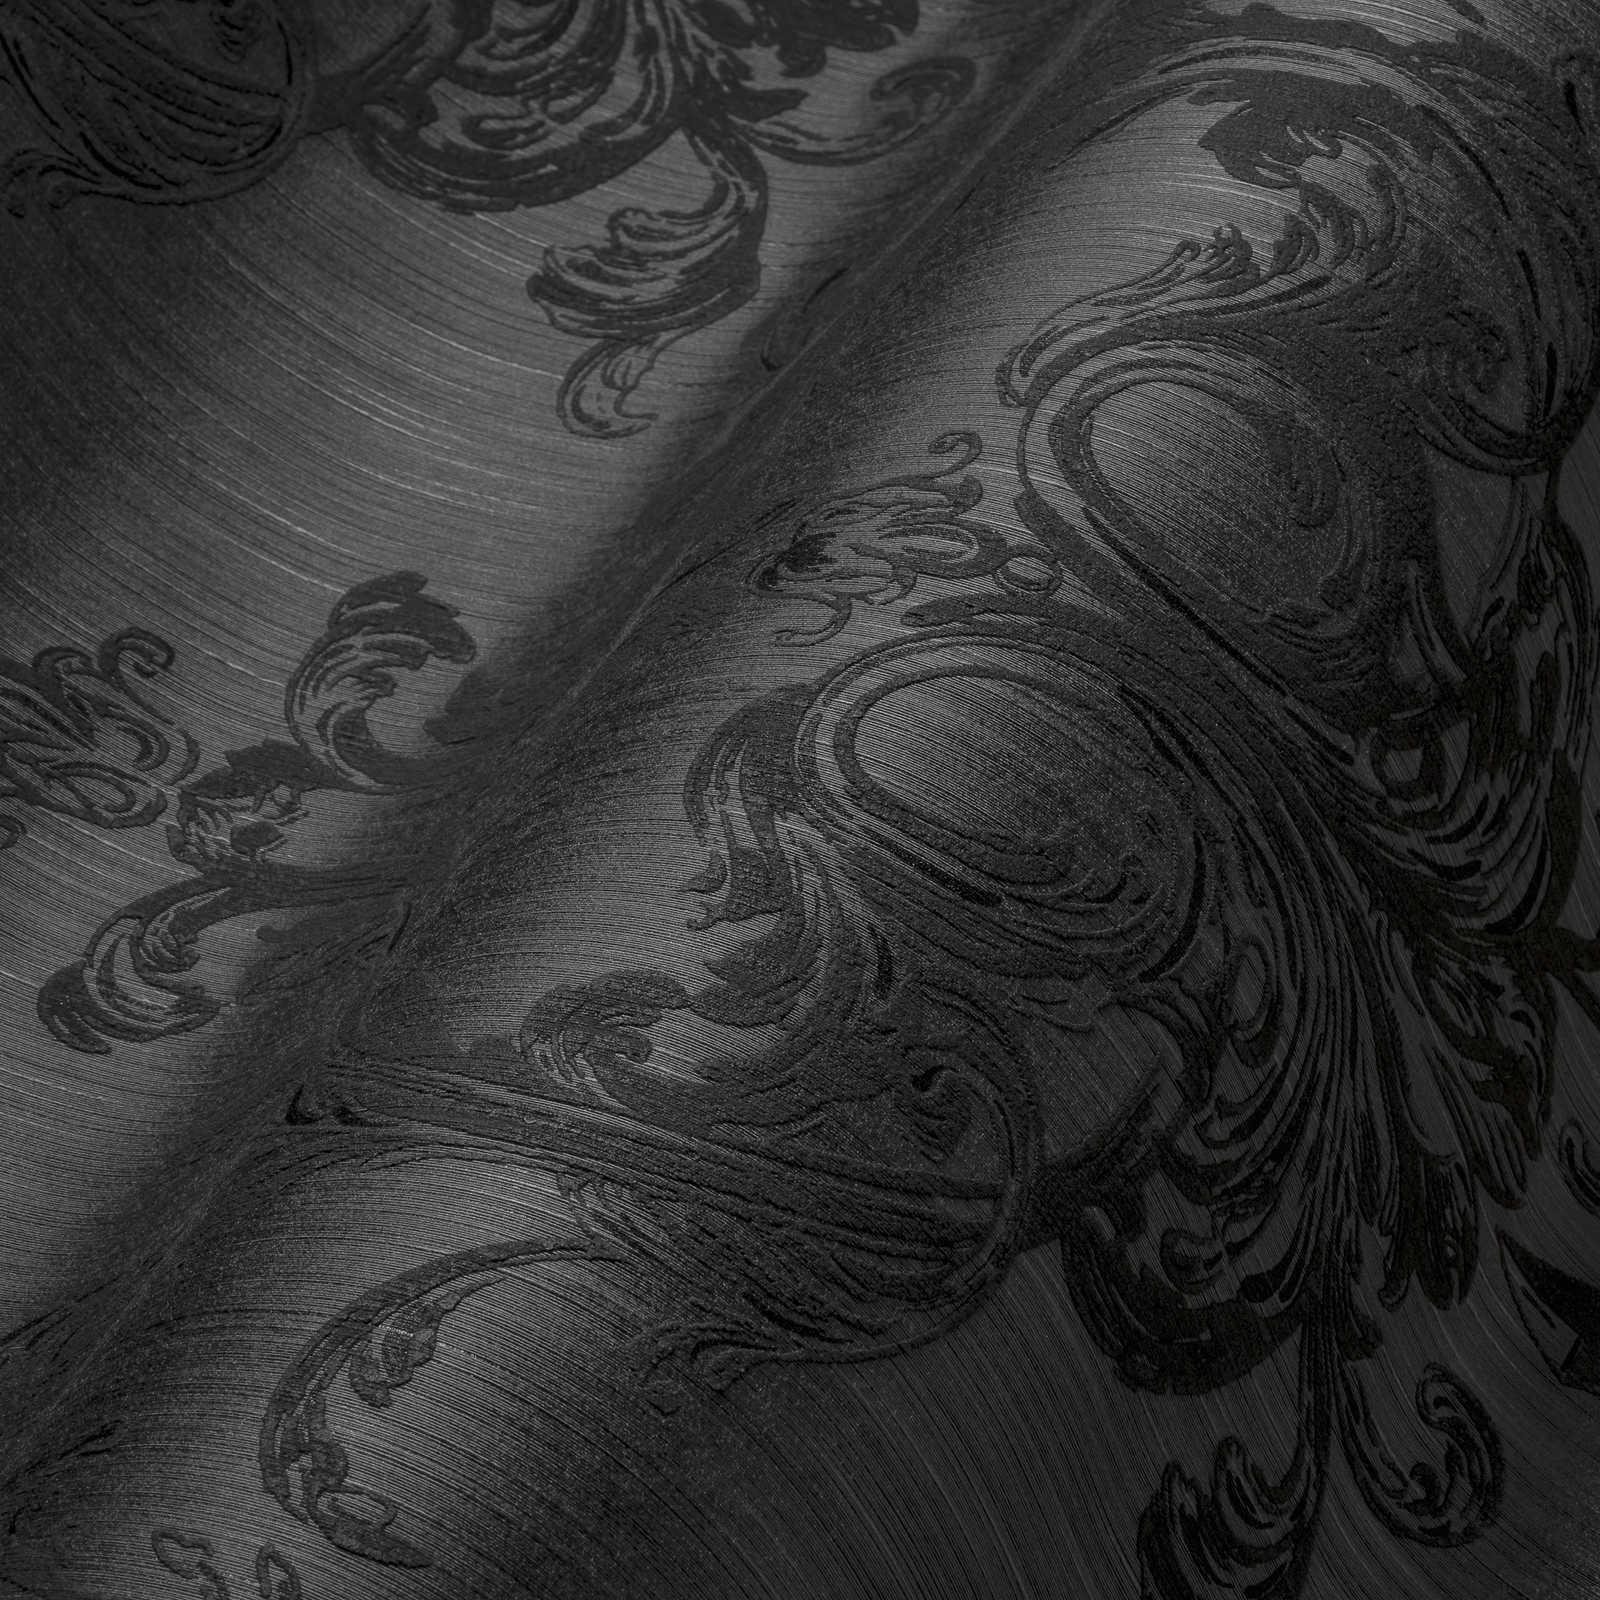             Ornament wallpaper detailed with textured pattern - brown
        